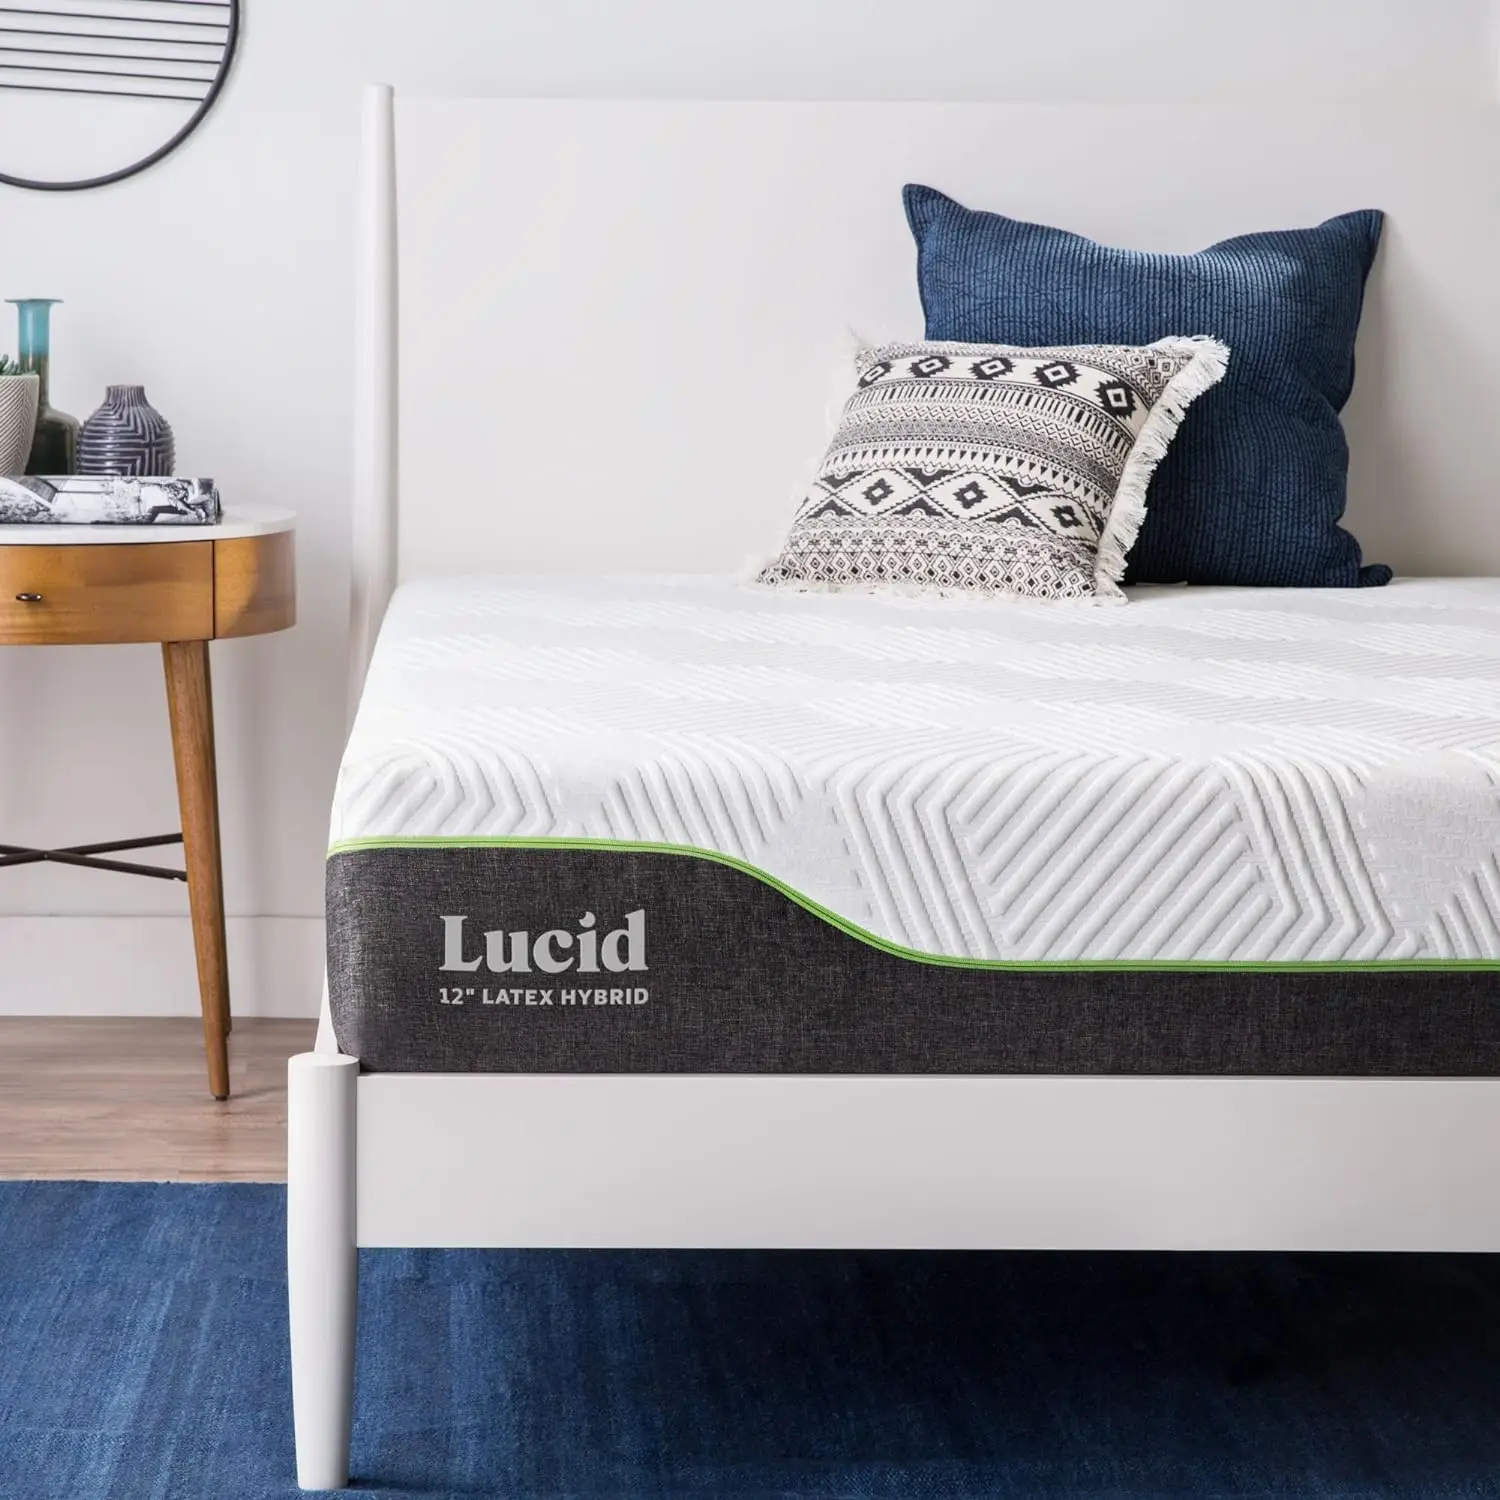 

LUCID 12 Inch Latex Hybrid Mattress - Responsive Latex Foam and Encased Springs Firm Feel -Motion Isolation - Edge Support